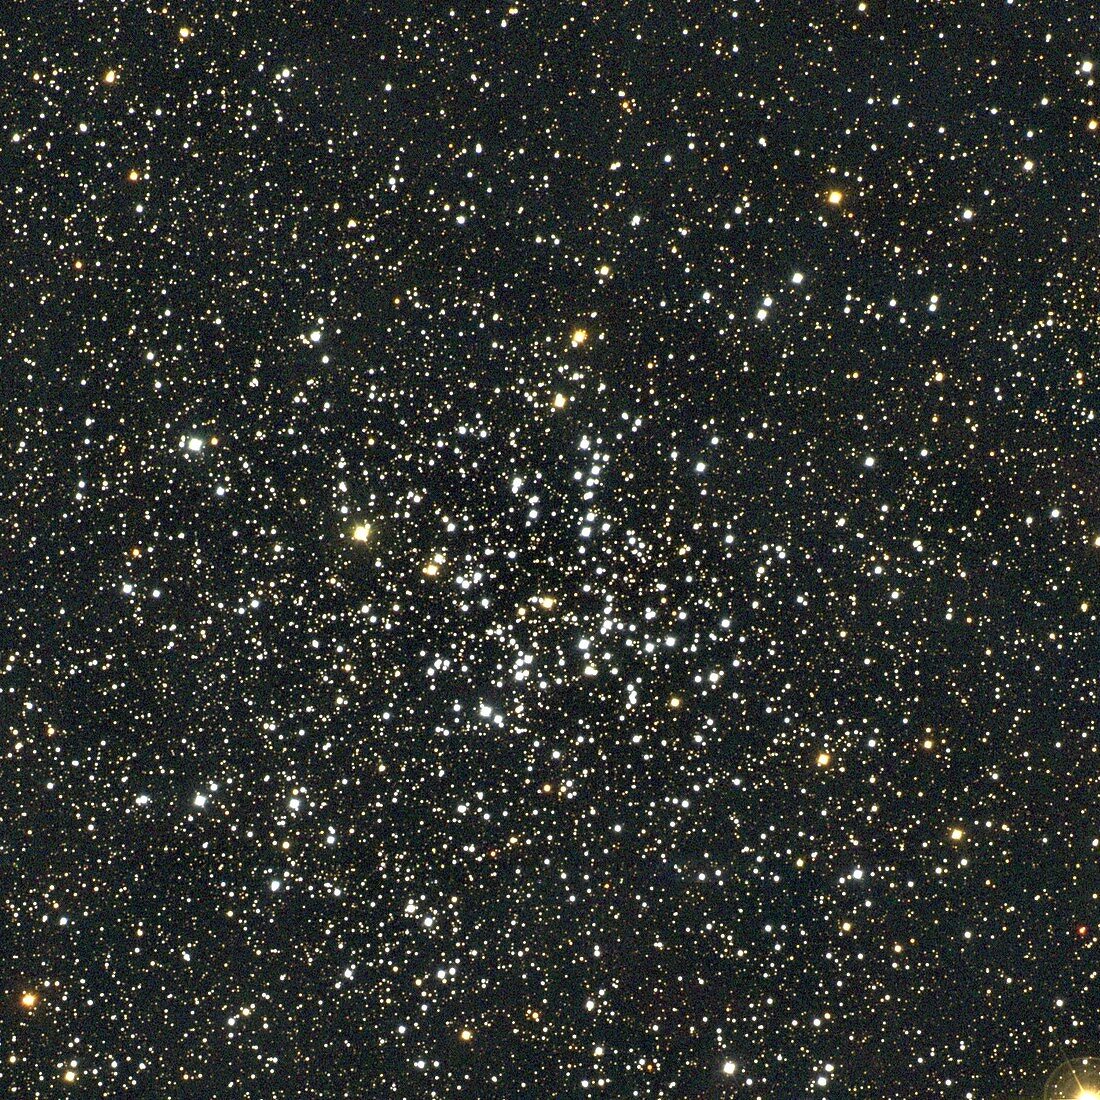 Open star cluster M38